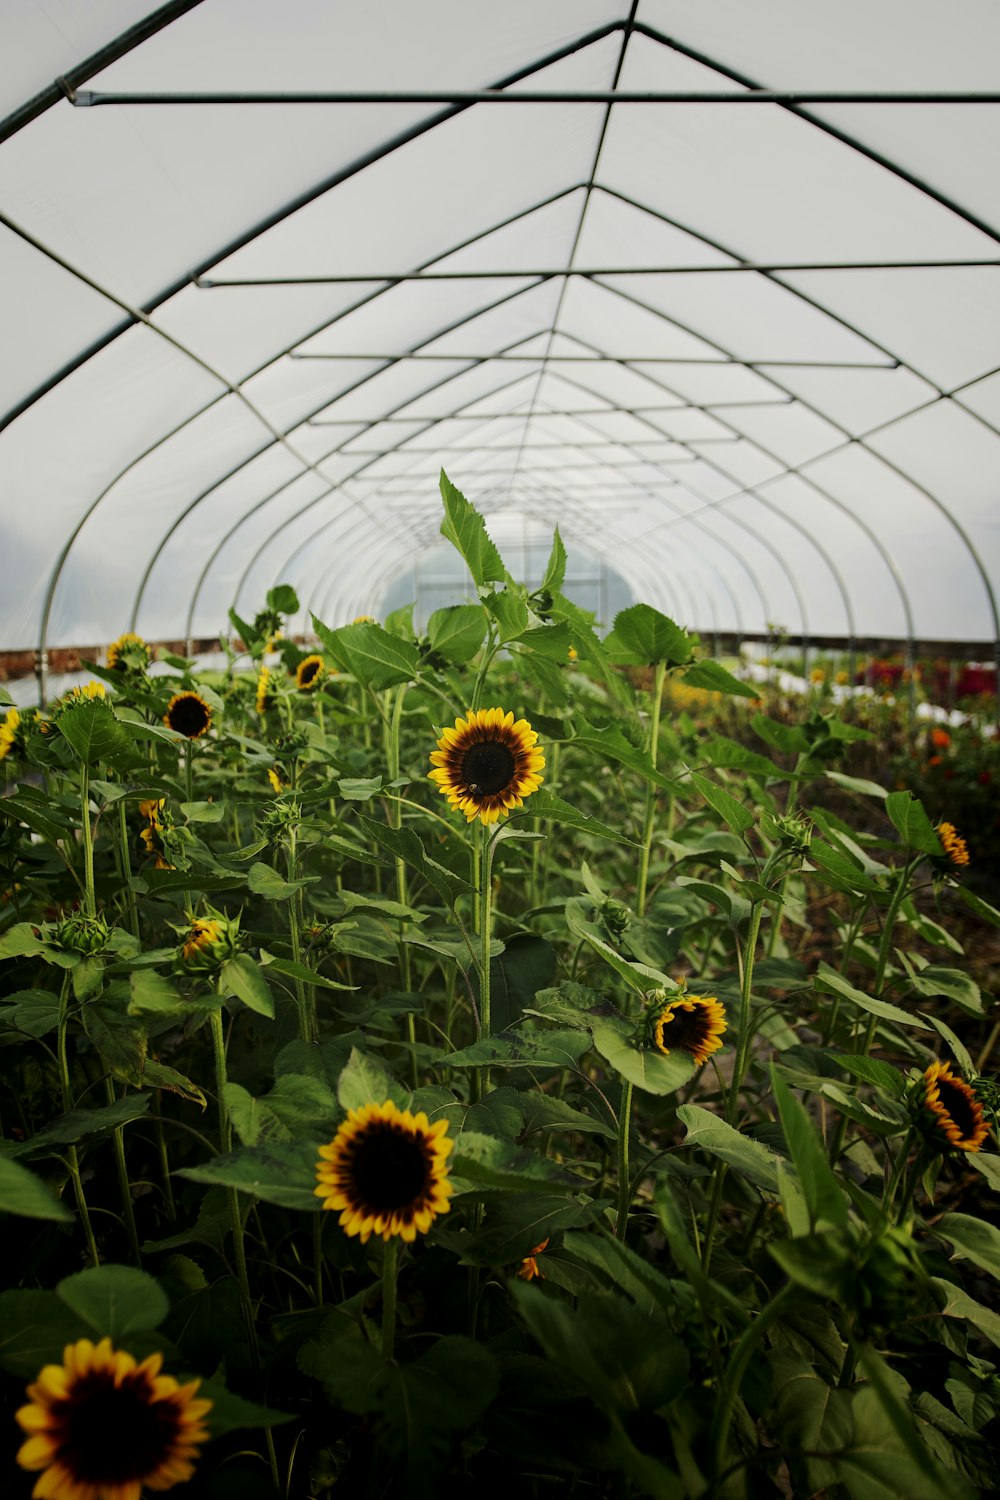 sunflowers growing in a greenhouse in a rural area